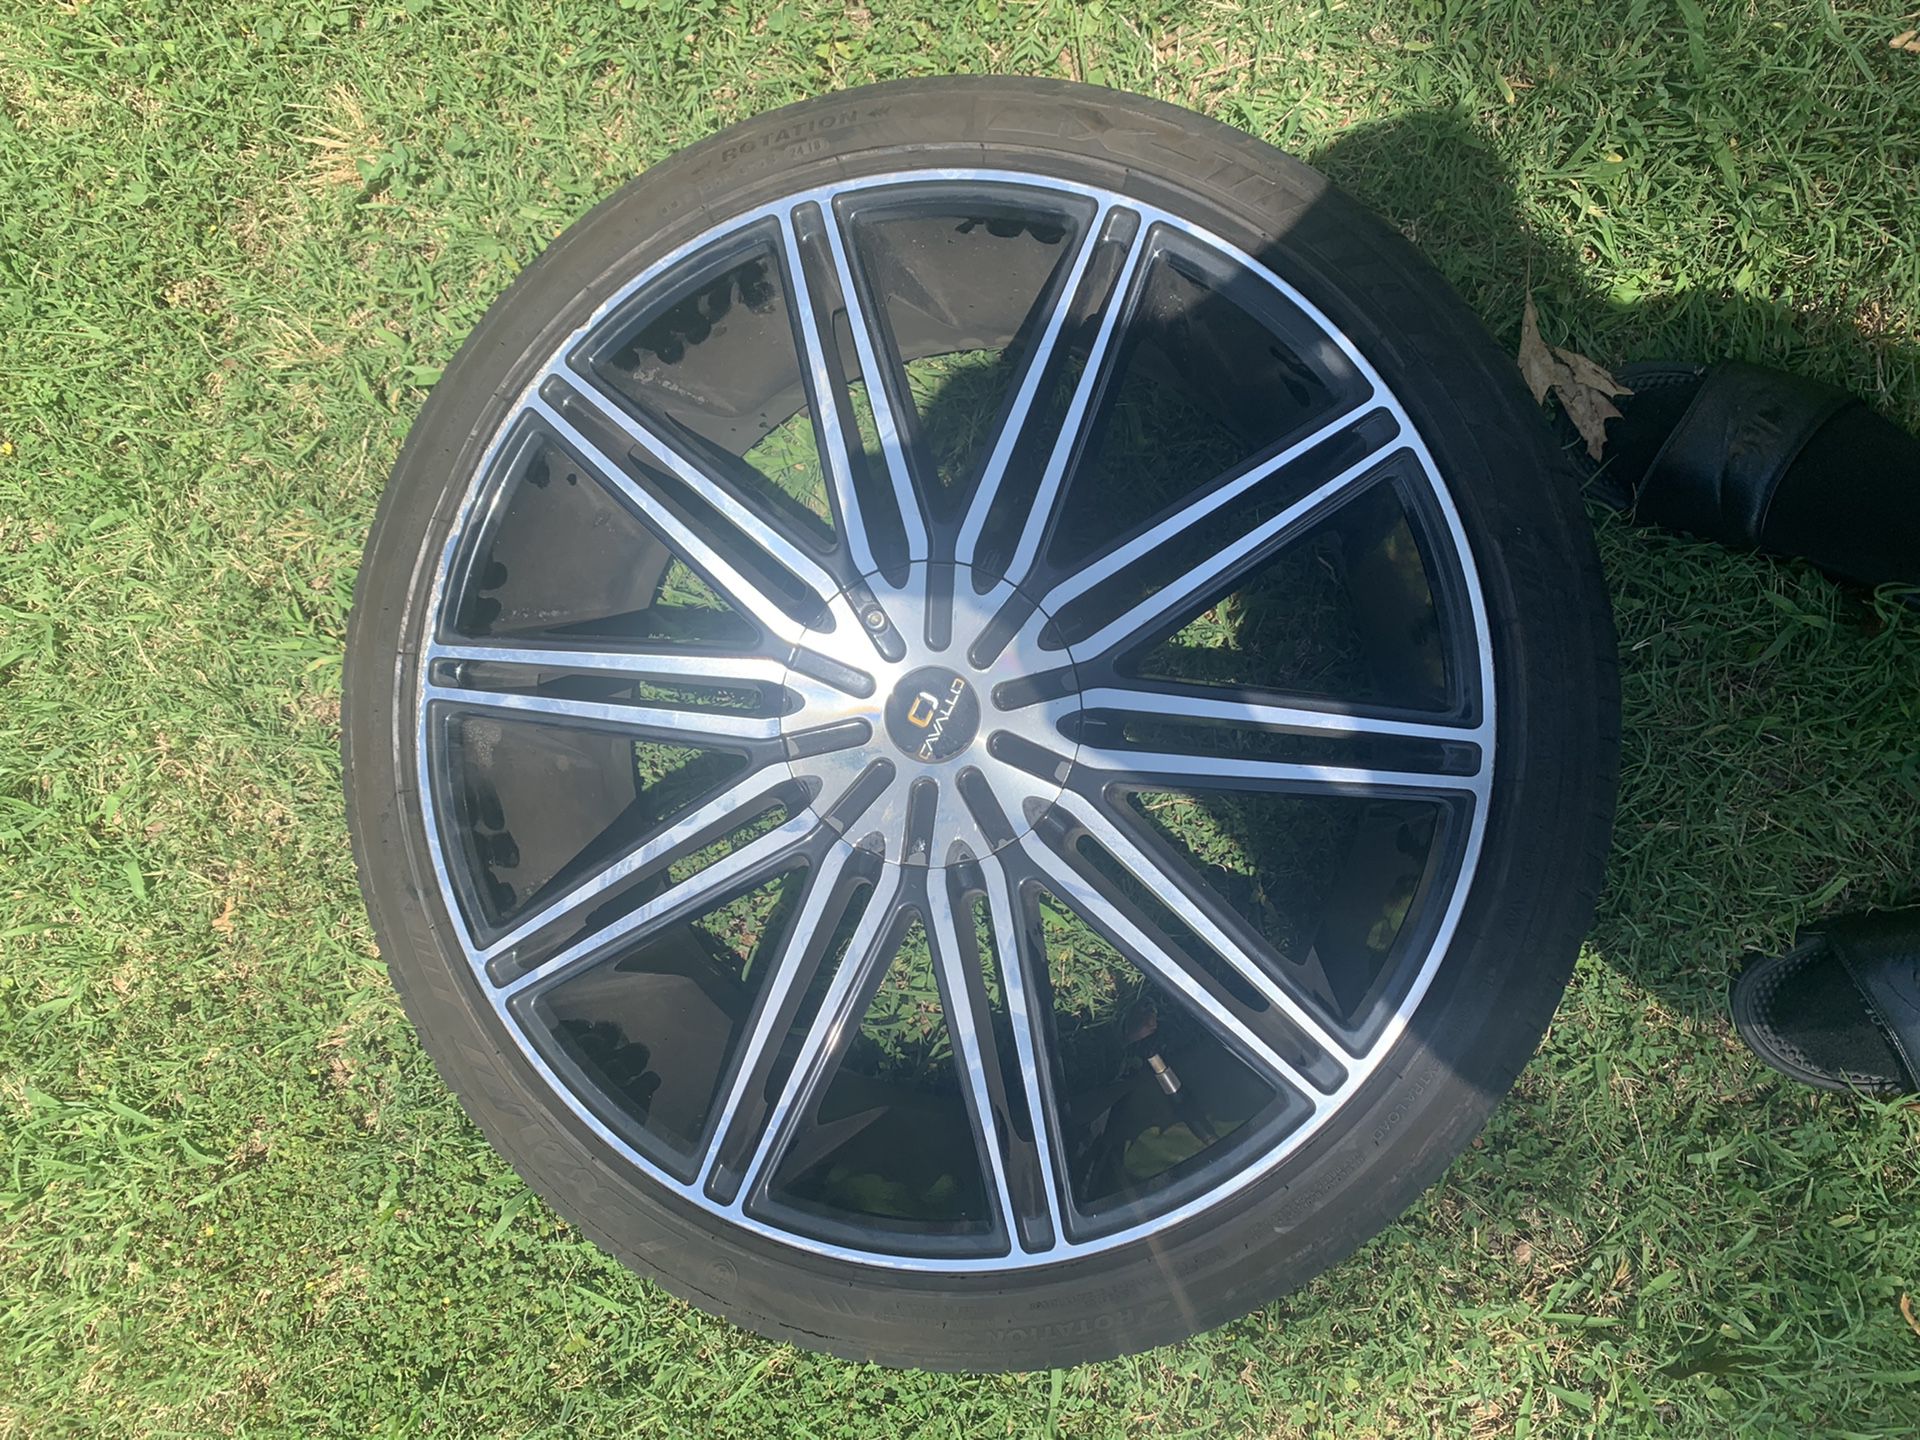 22in 5 lug rims and tires for sale.